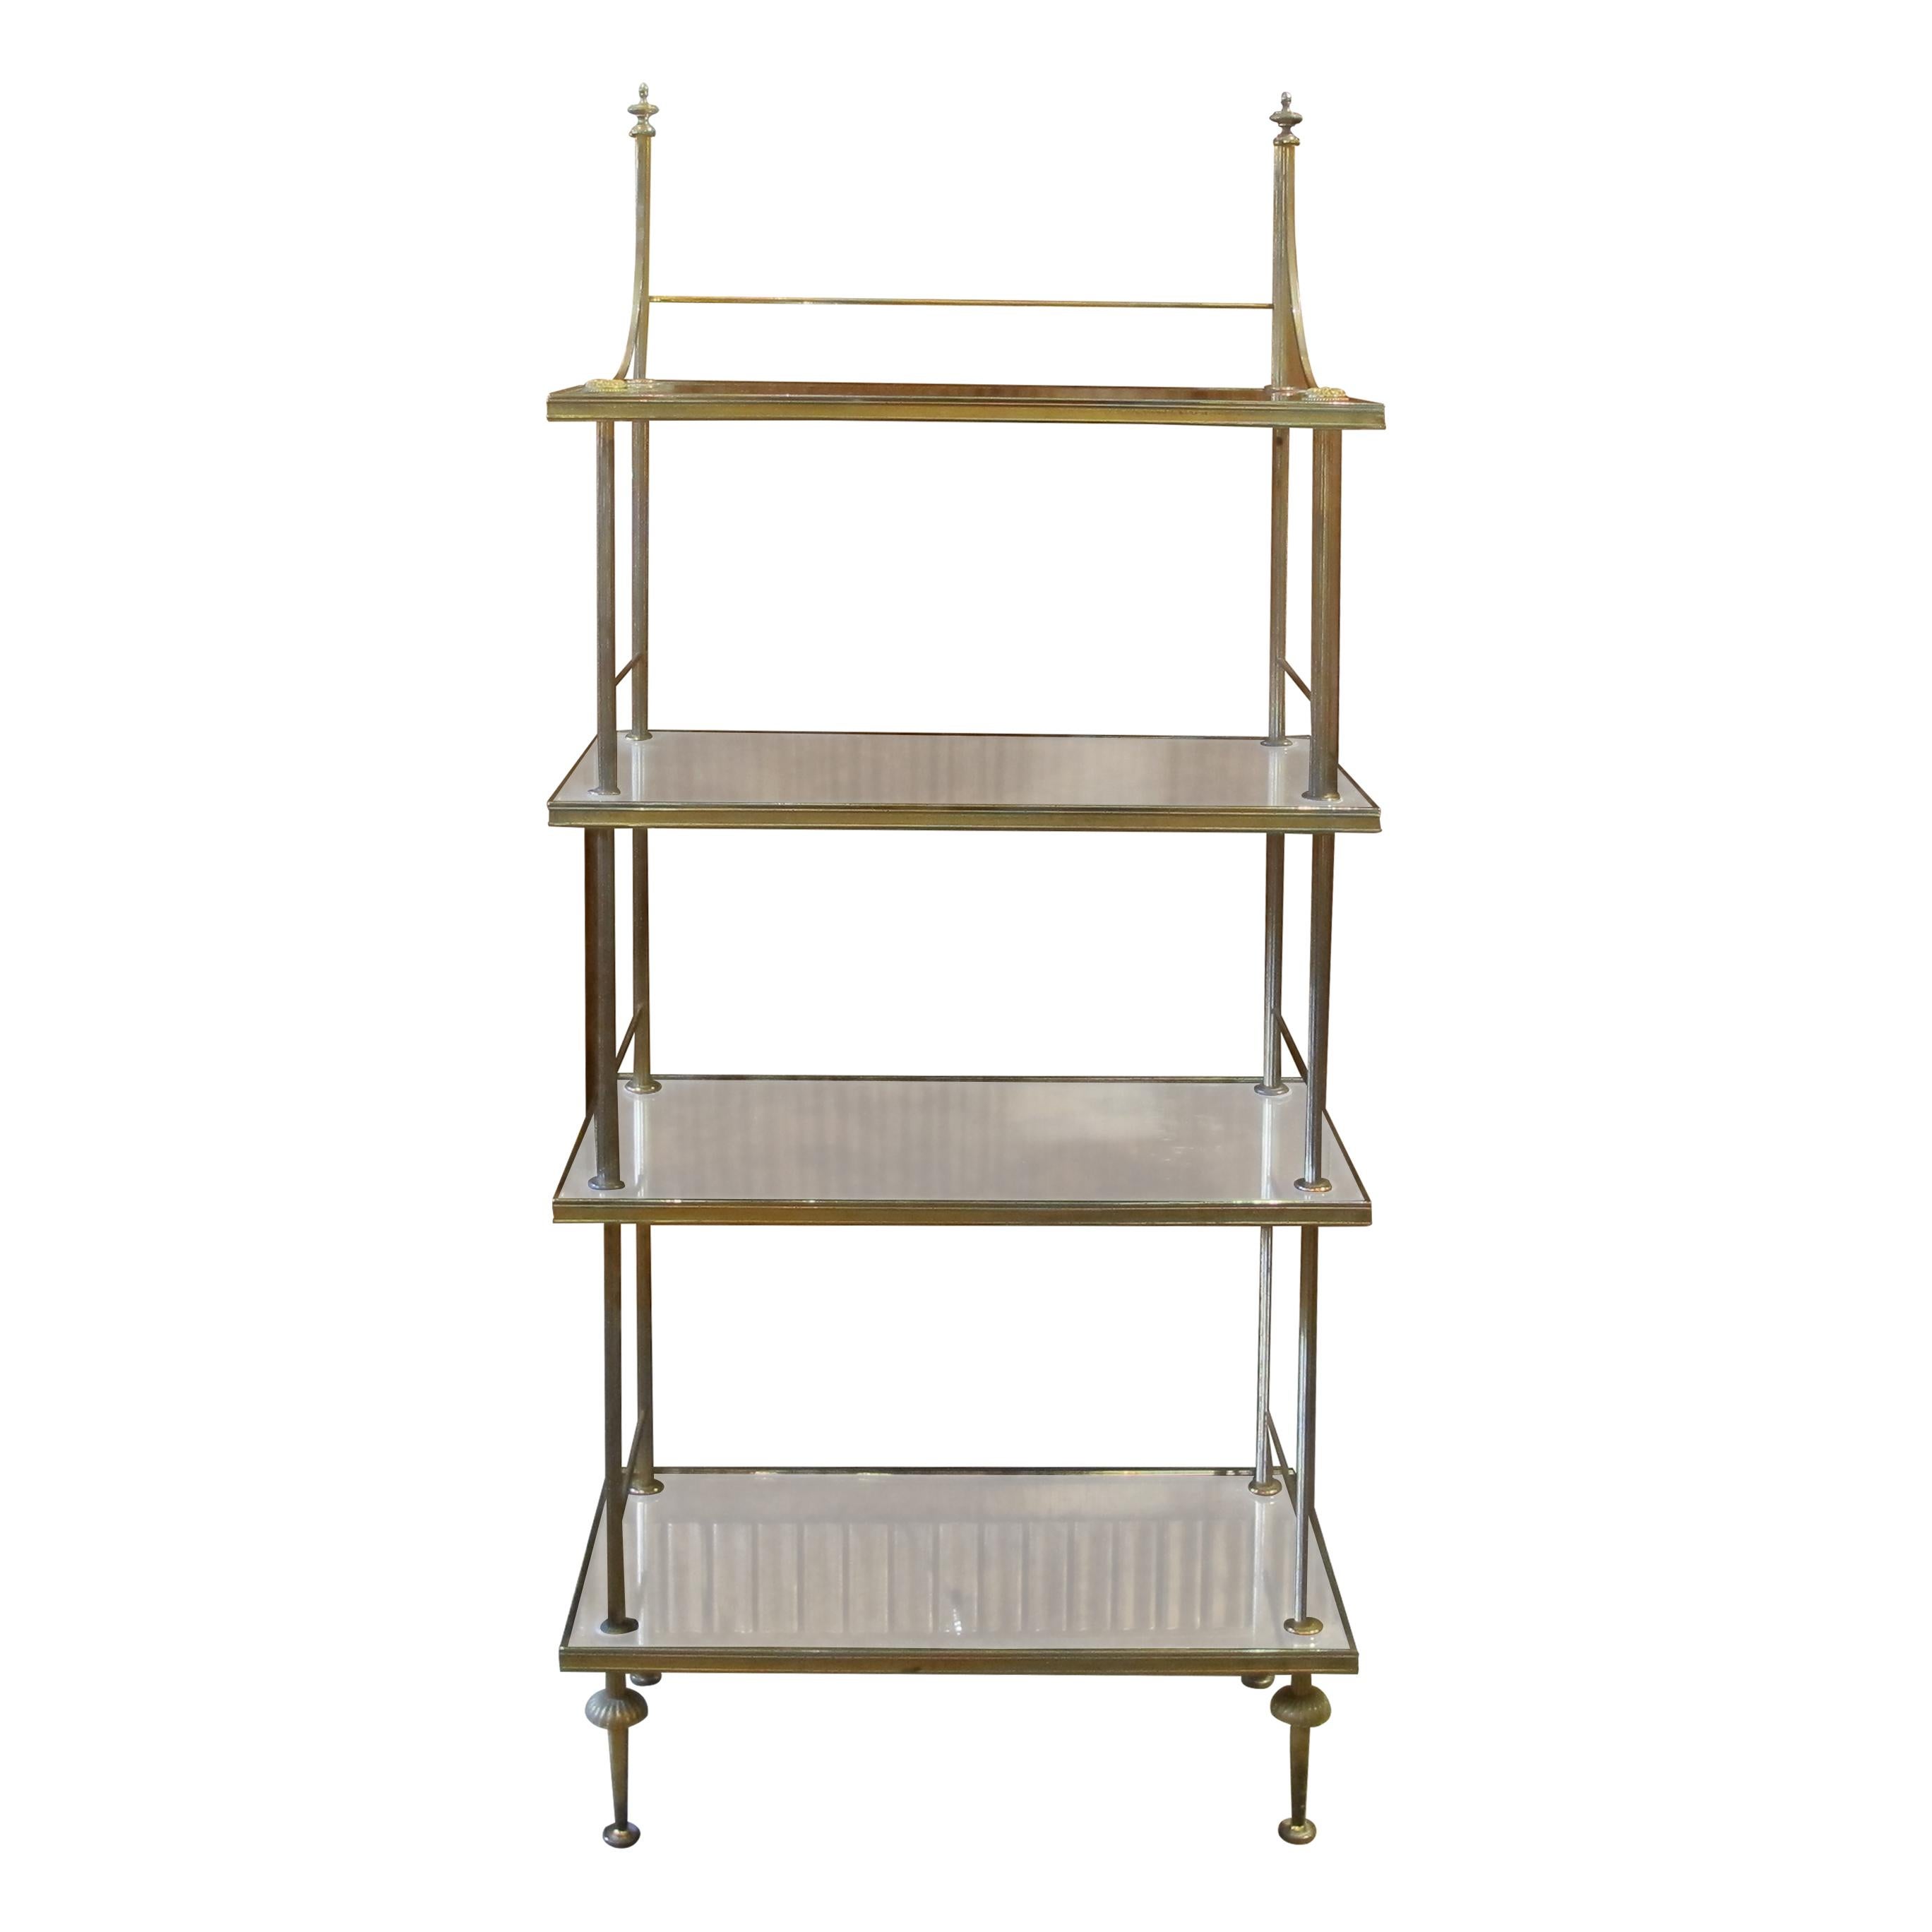 1950s Neoclassical rare model four-tier étagère/shelving unit by Maison Baguès with antiqued mirrors and patinated brass frame with acorns. The elegant design of the étagère makes it very versatile and can be used in any room to complement any